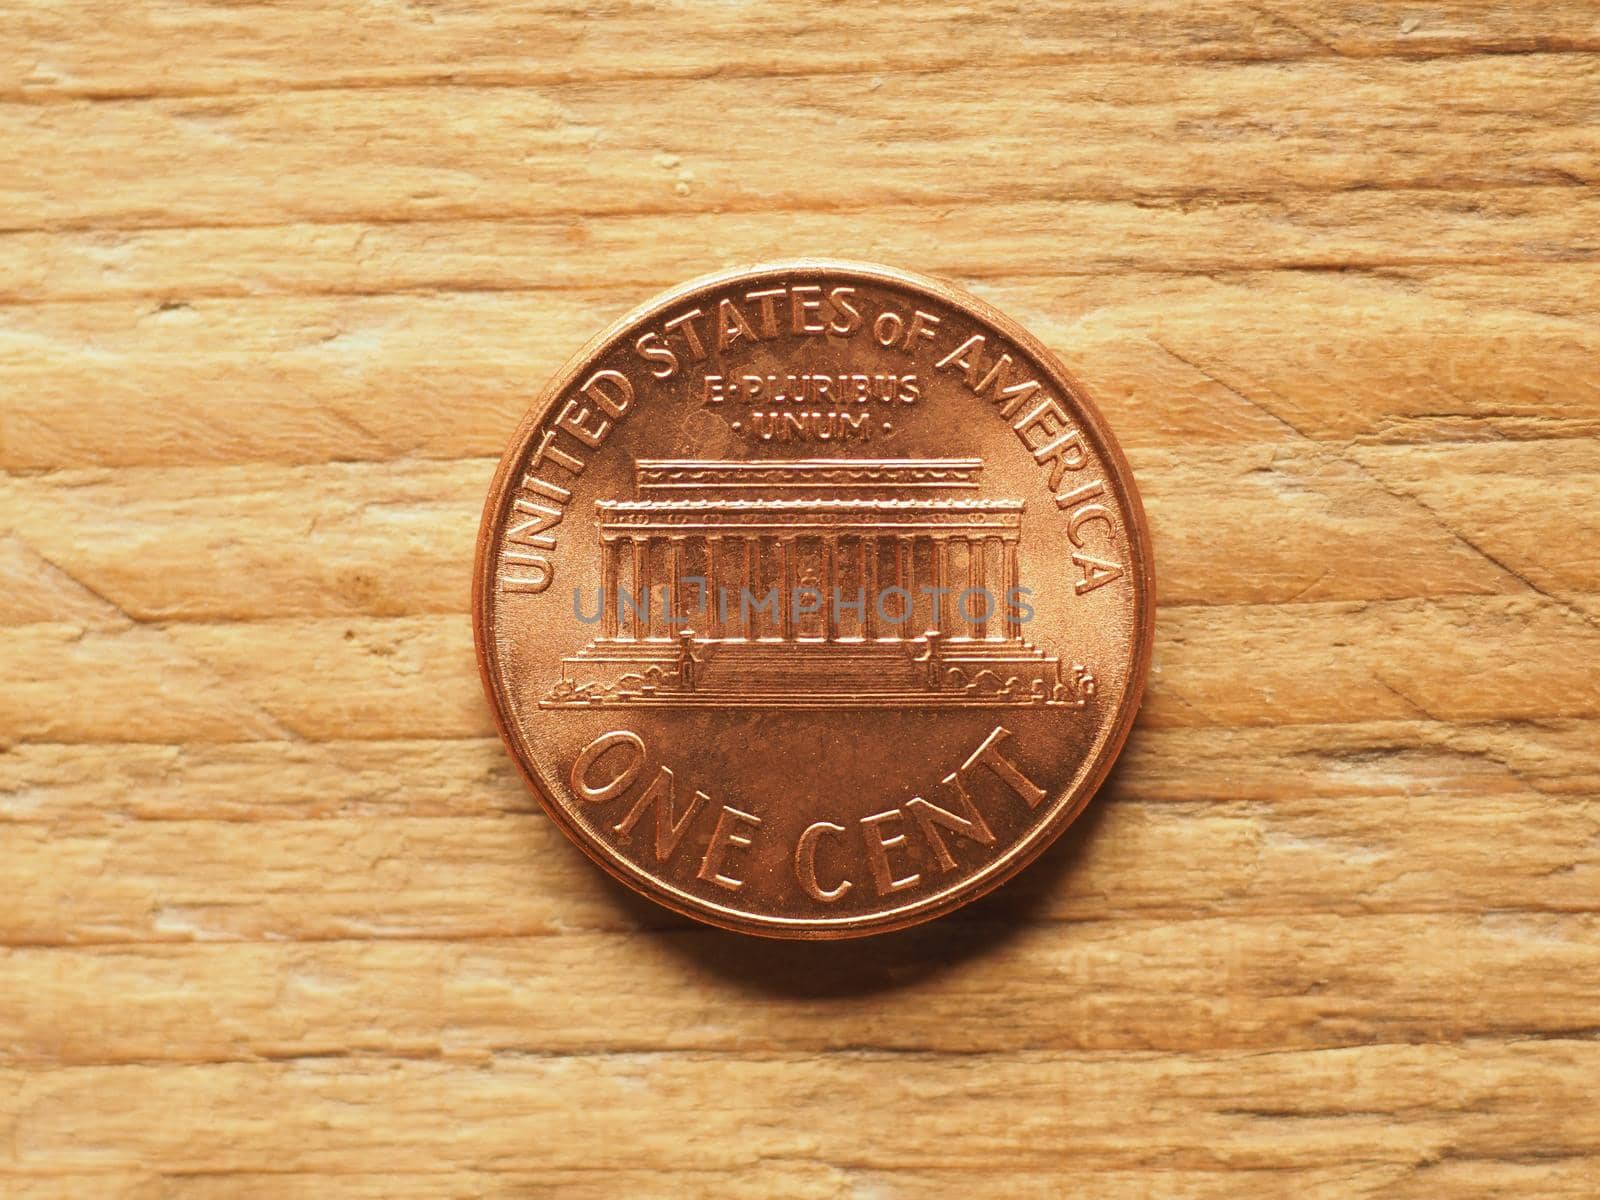 1 cent coin, reverse side showing Lincoln memorial, currency of the USA by claudiodivizia